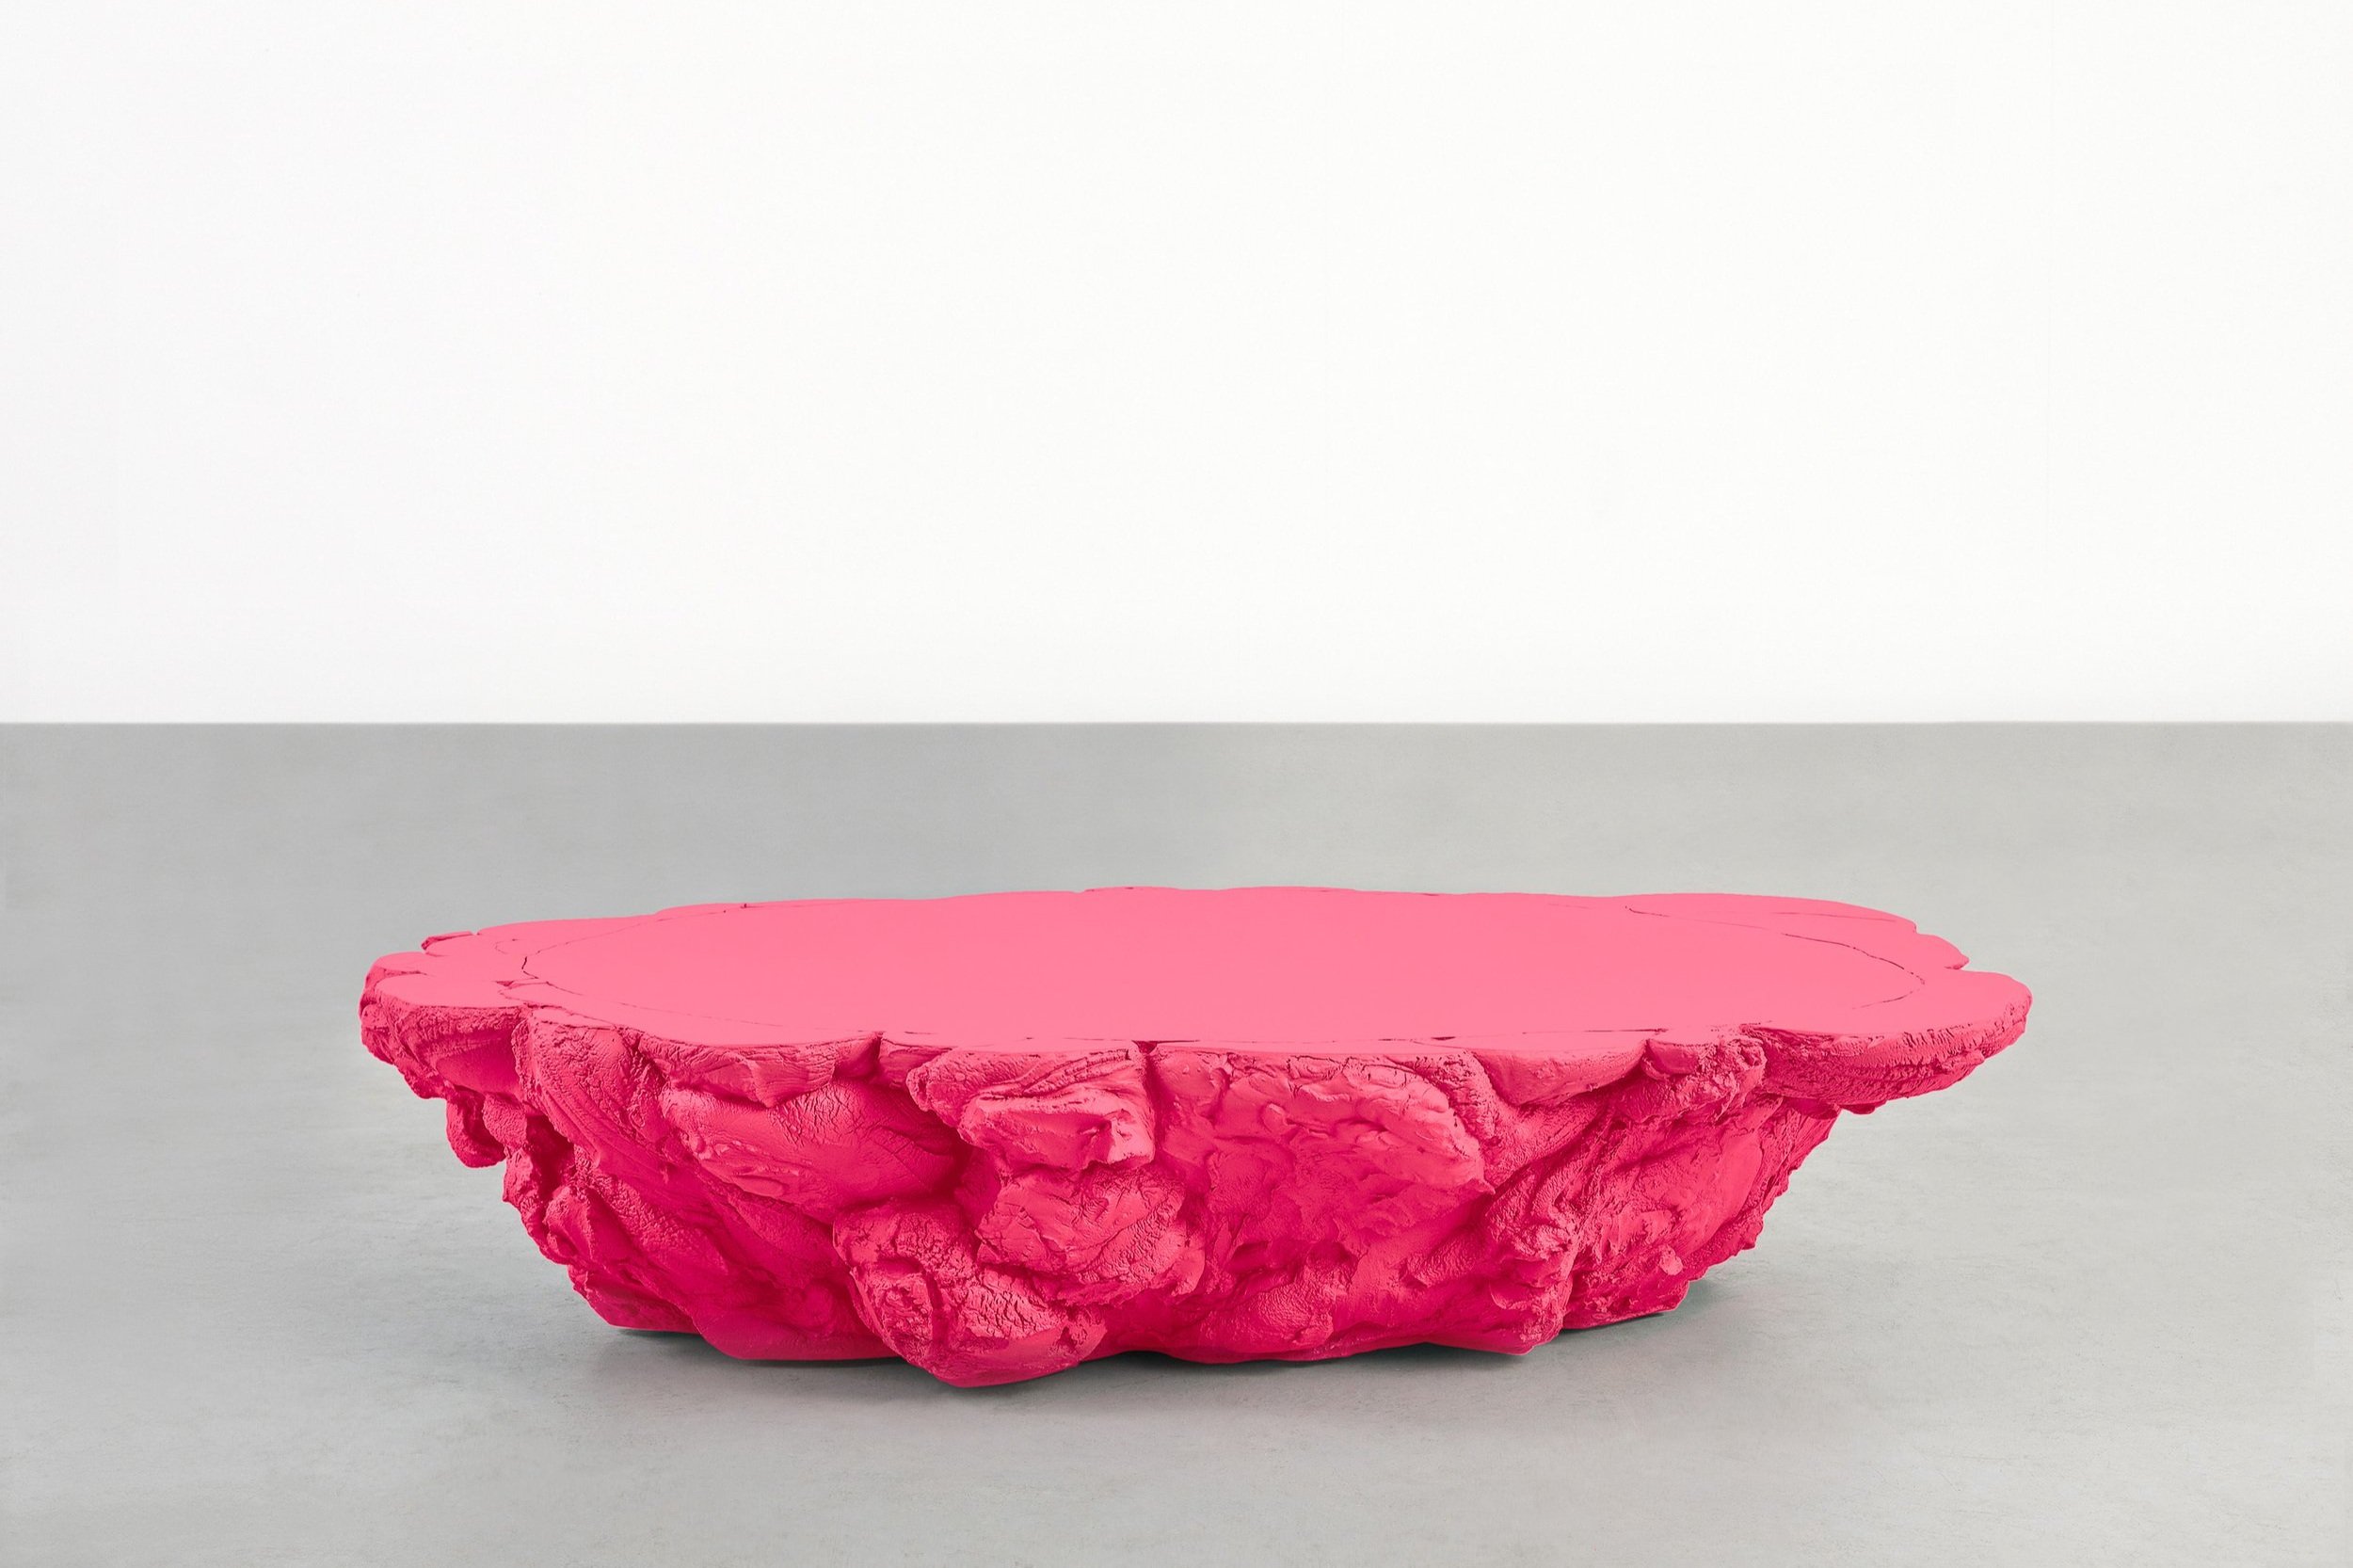 2.+FS+Coffee+Table+%27Rubber+Pink%27.jpg